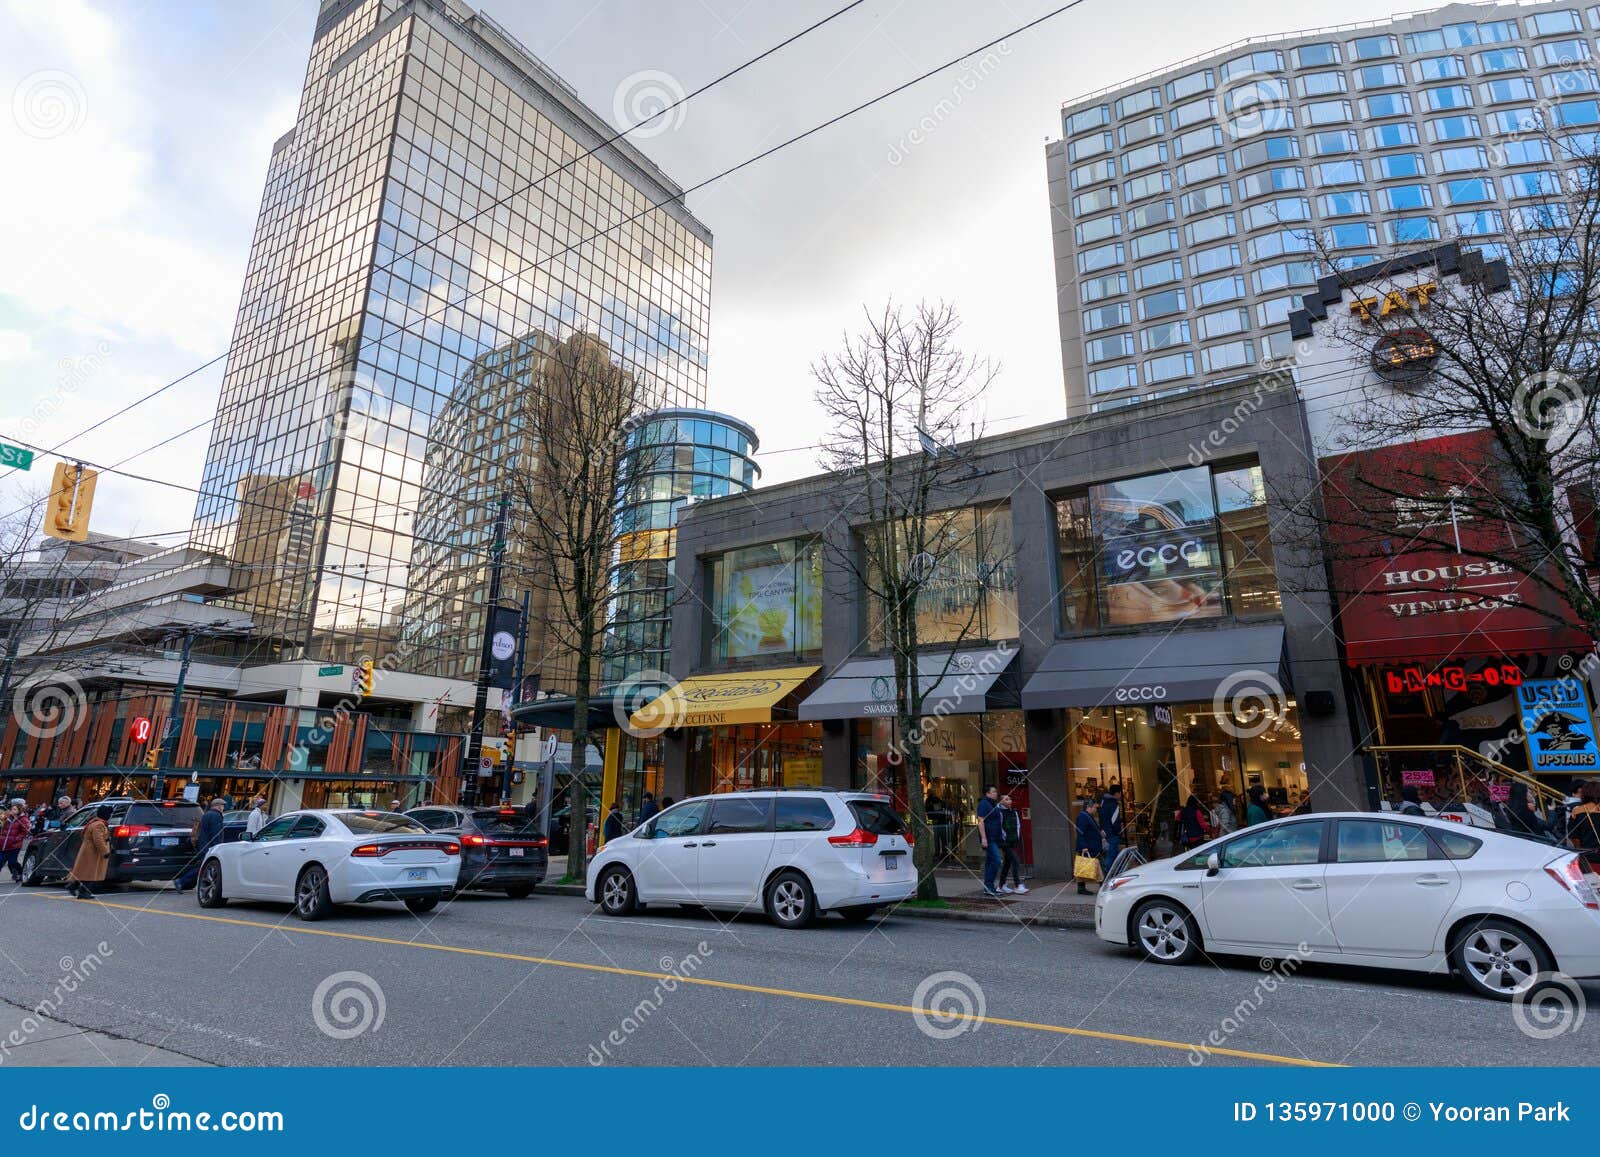 https://thumbs.dreamstime.com/z/robson-street-downtown-shopping-district-vancouver-bc-canada-feb-135971000.jpg